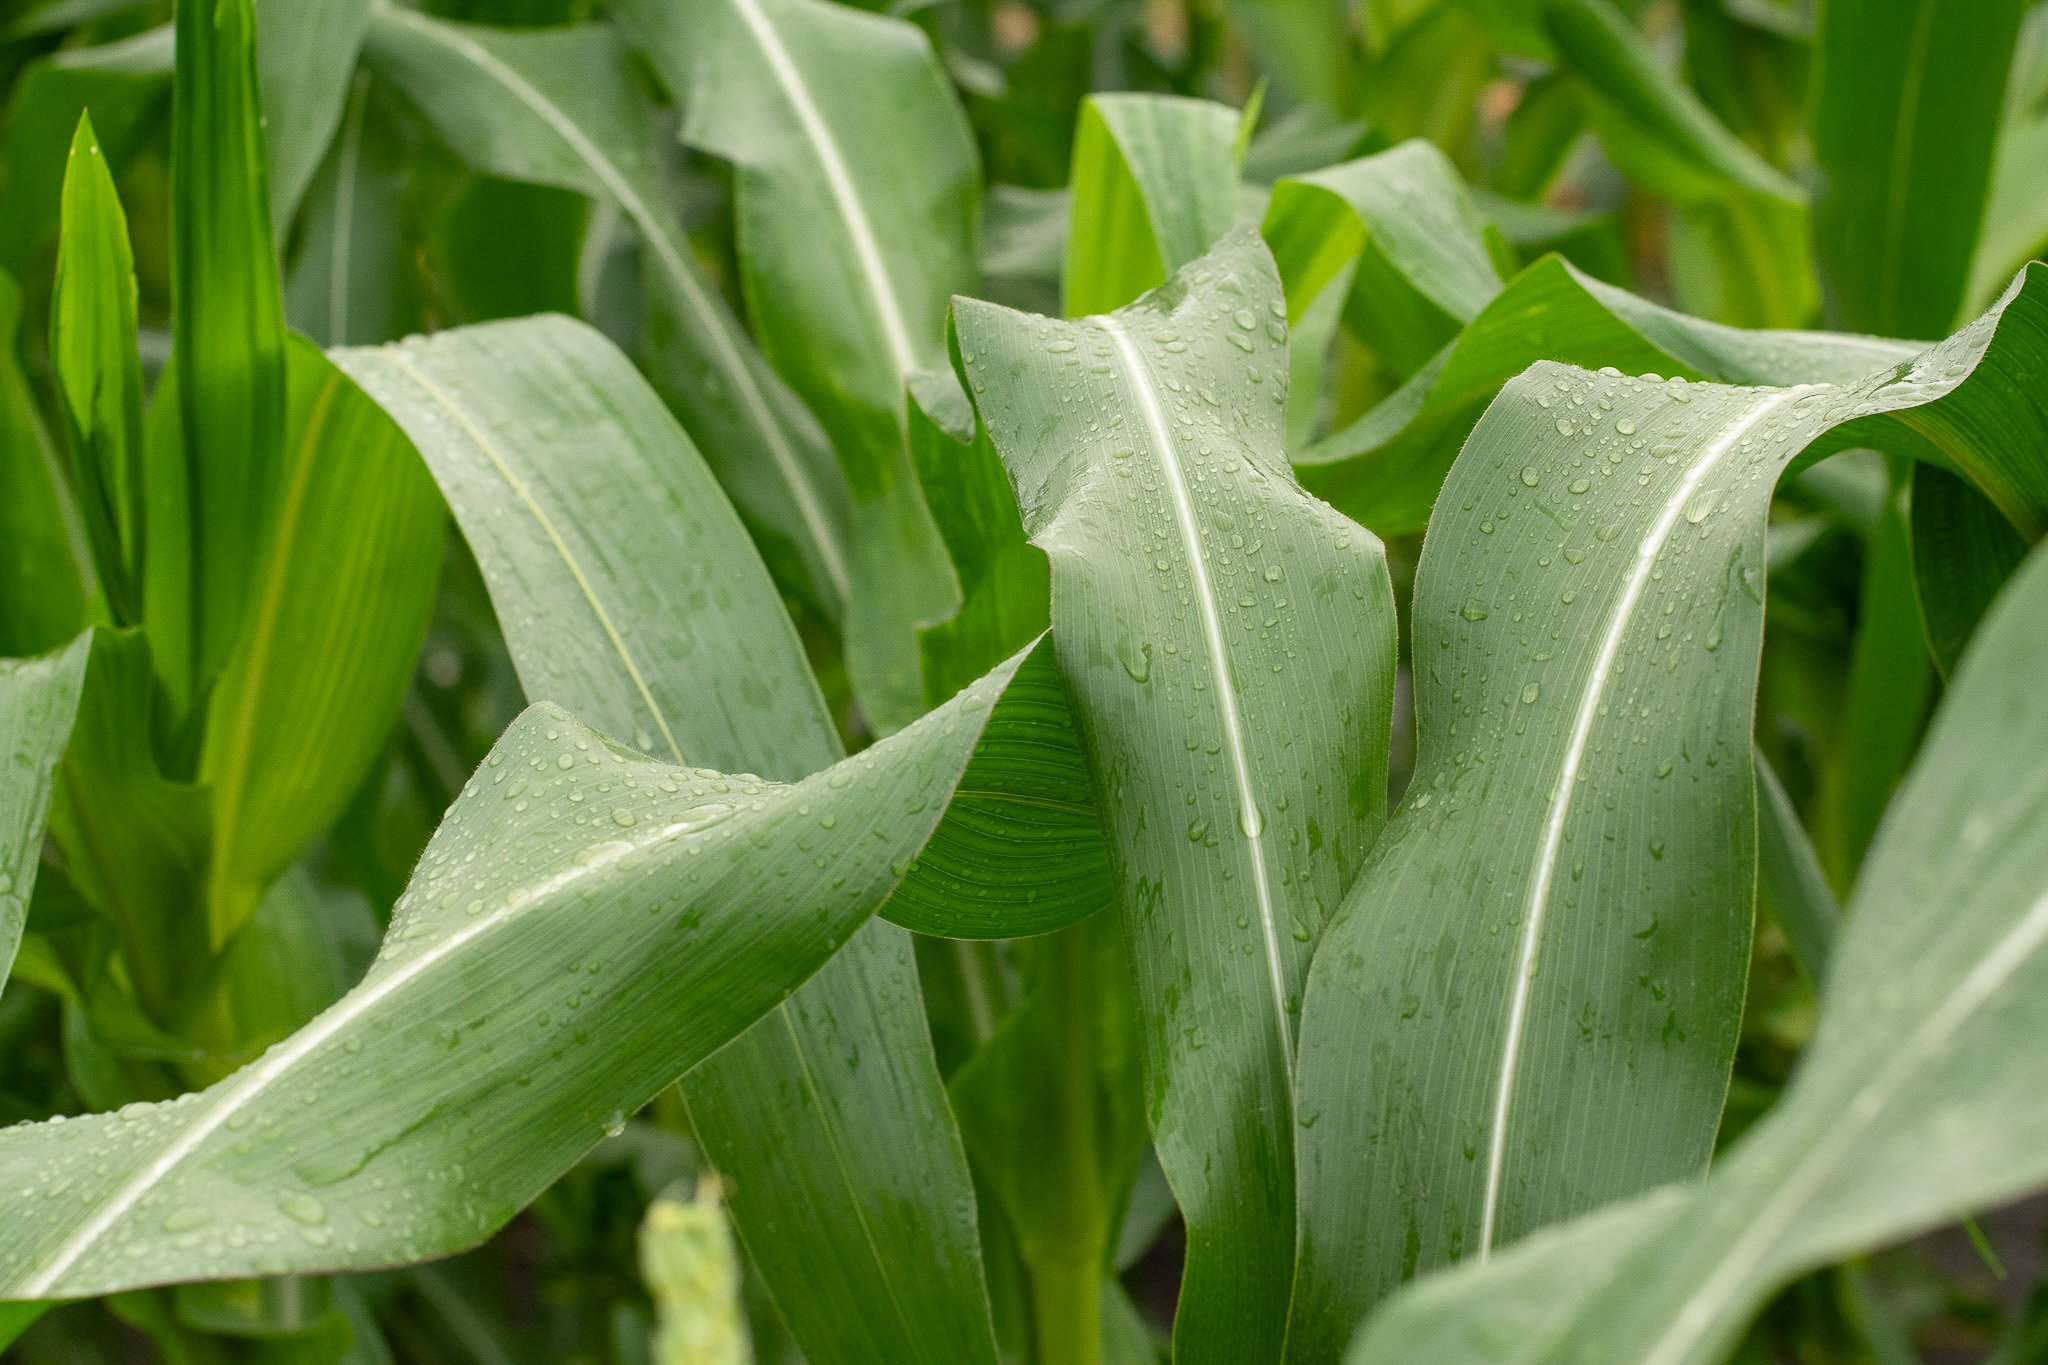   Water droplets collect on the billowing leaves of a corn plant Sept 13.  